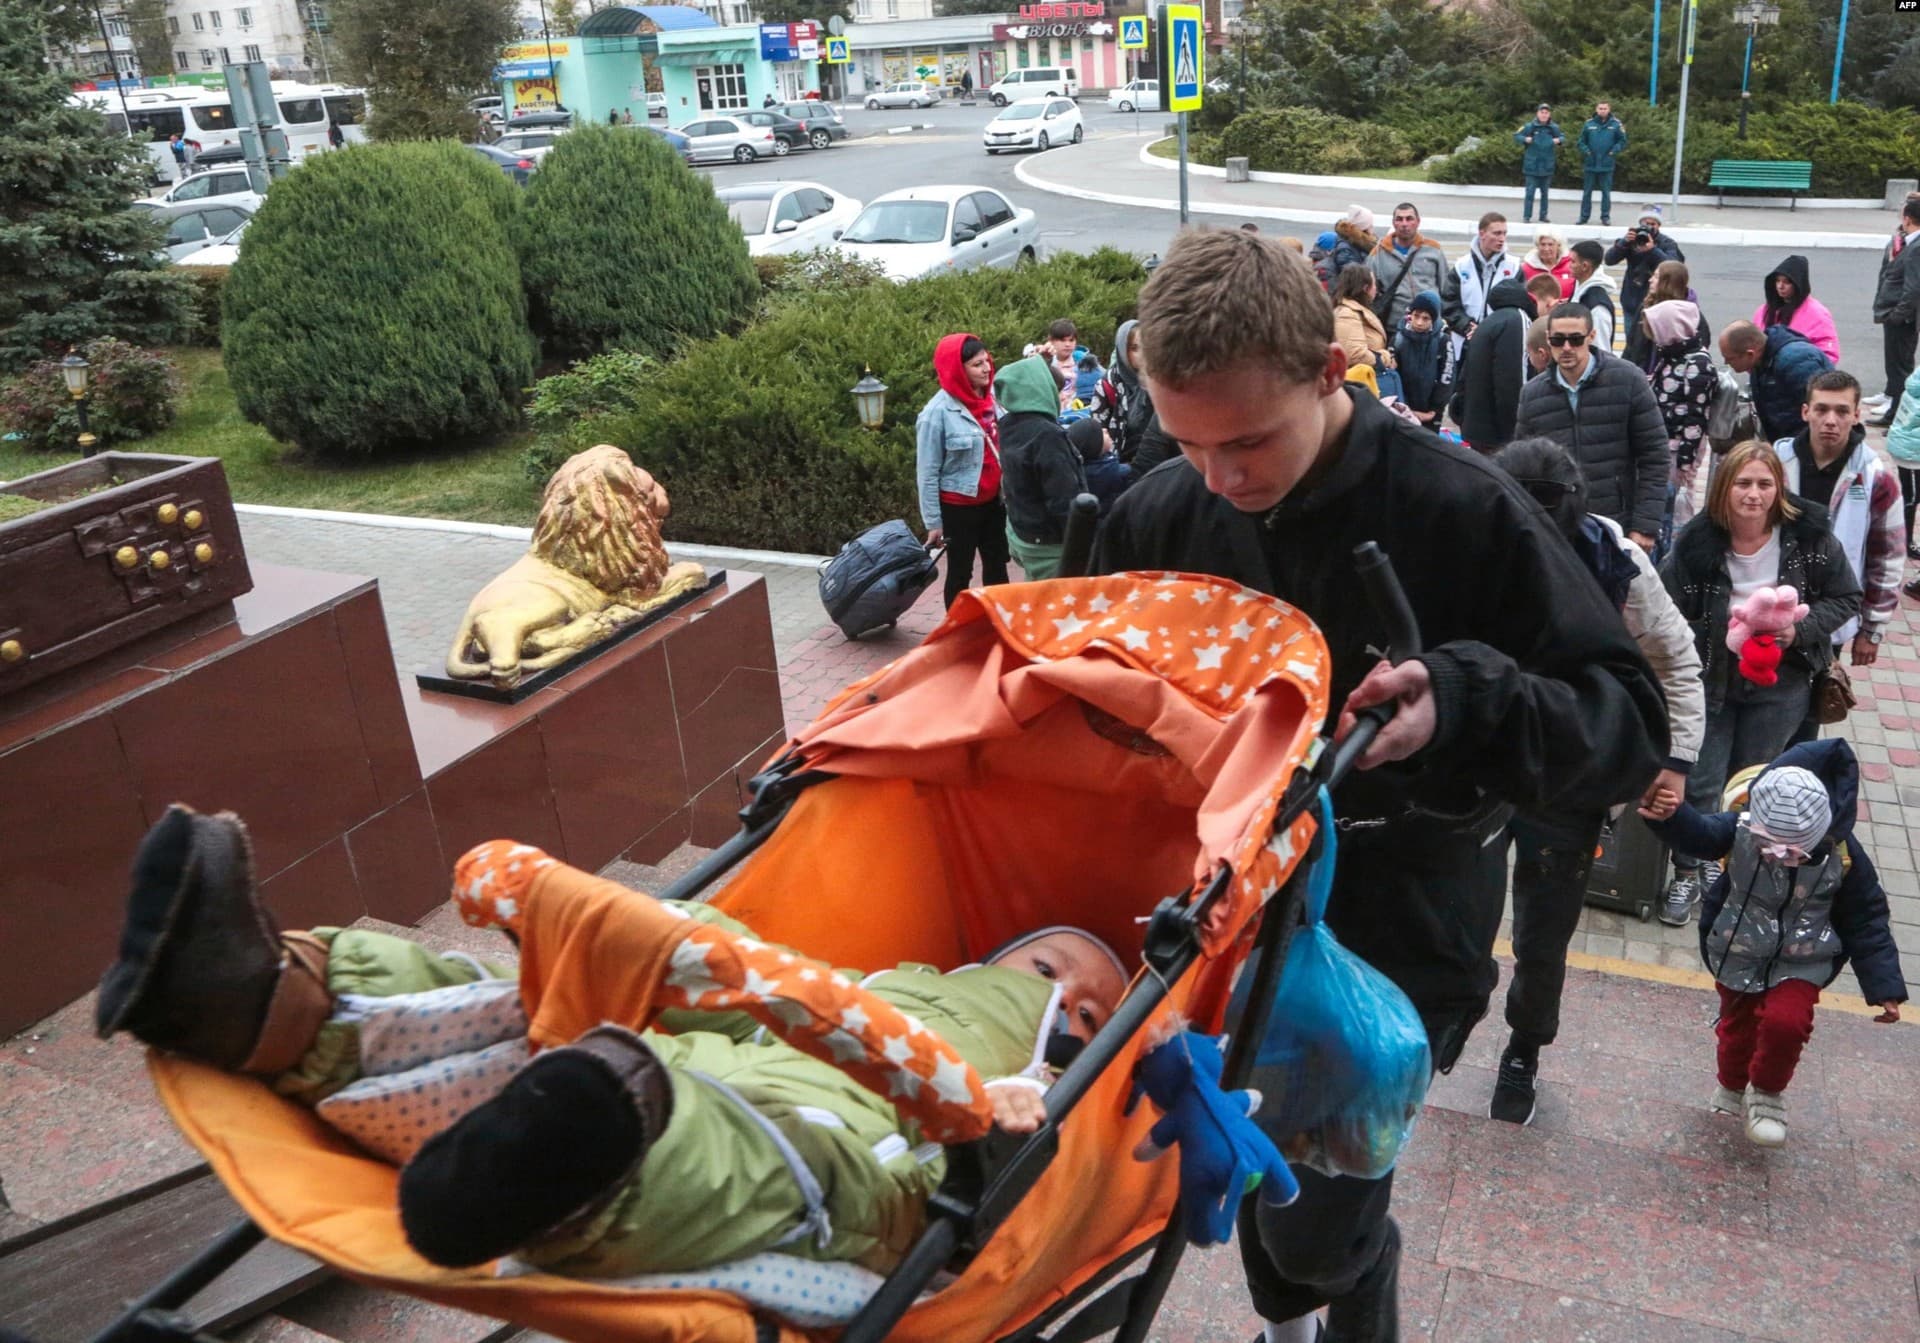 A man carries a baby in a stroller up the stairs of the Dzhankoi train station in Crimea